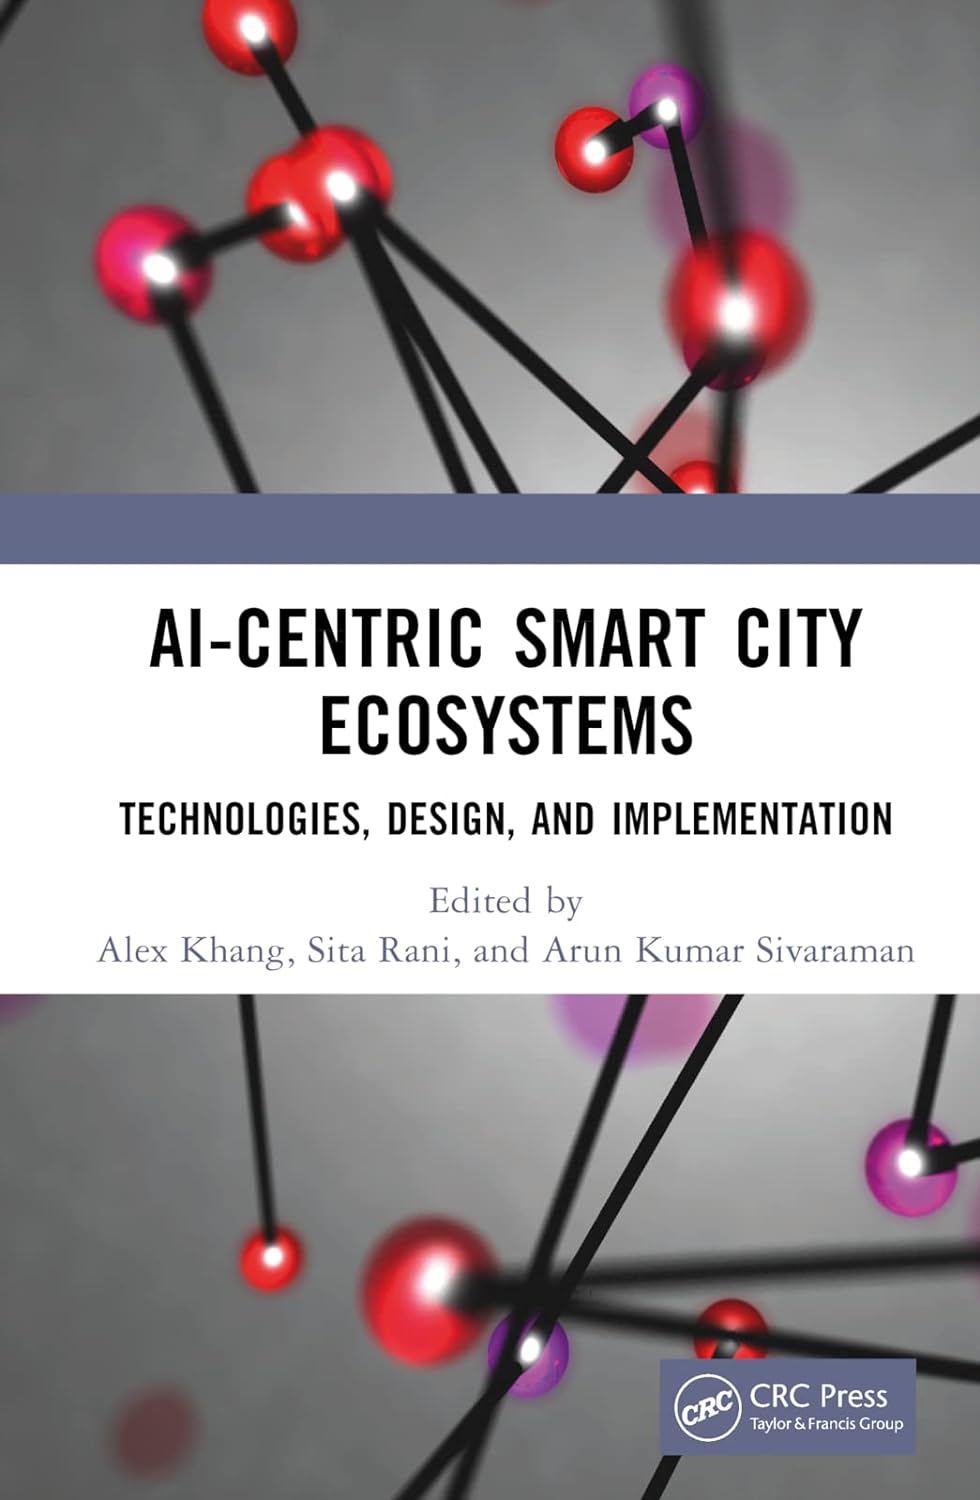 AI-Centric Smart City Ecosystem: Technologies, Design and Implementation